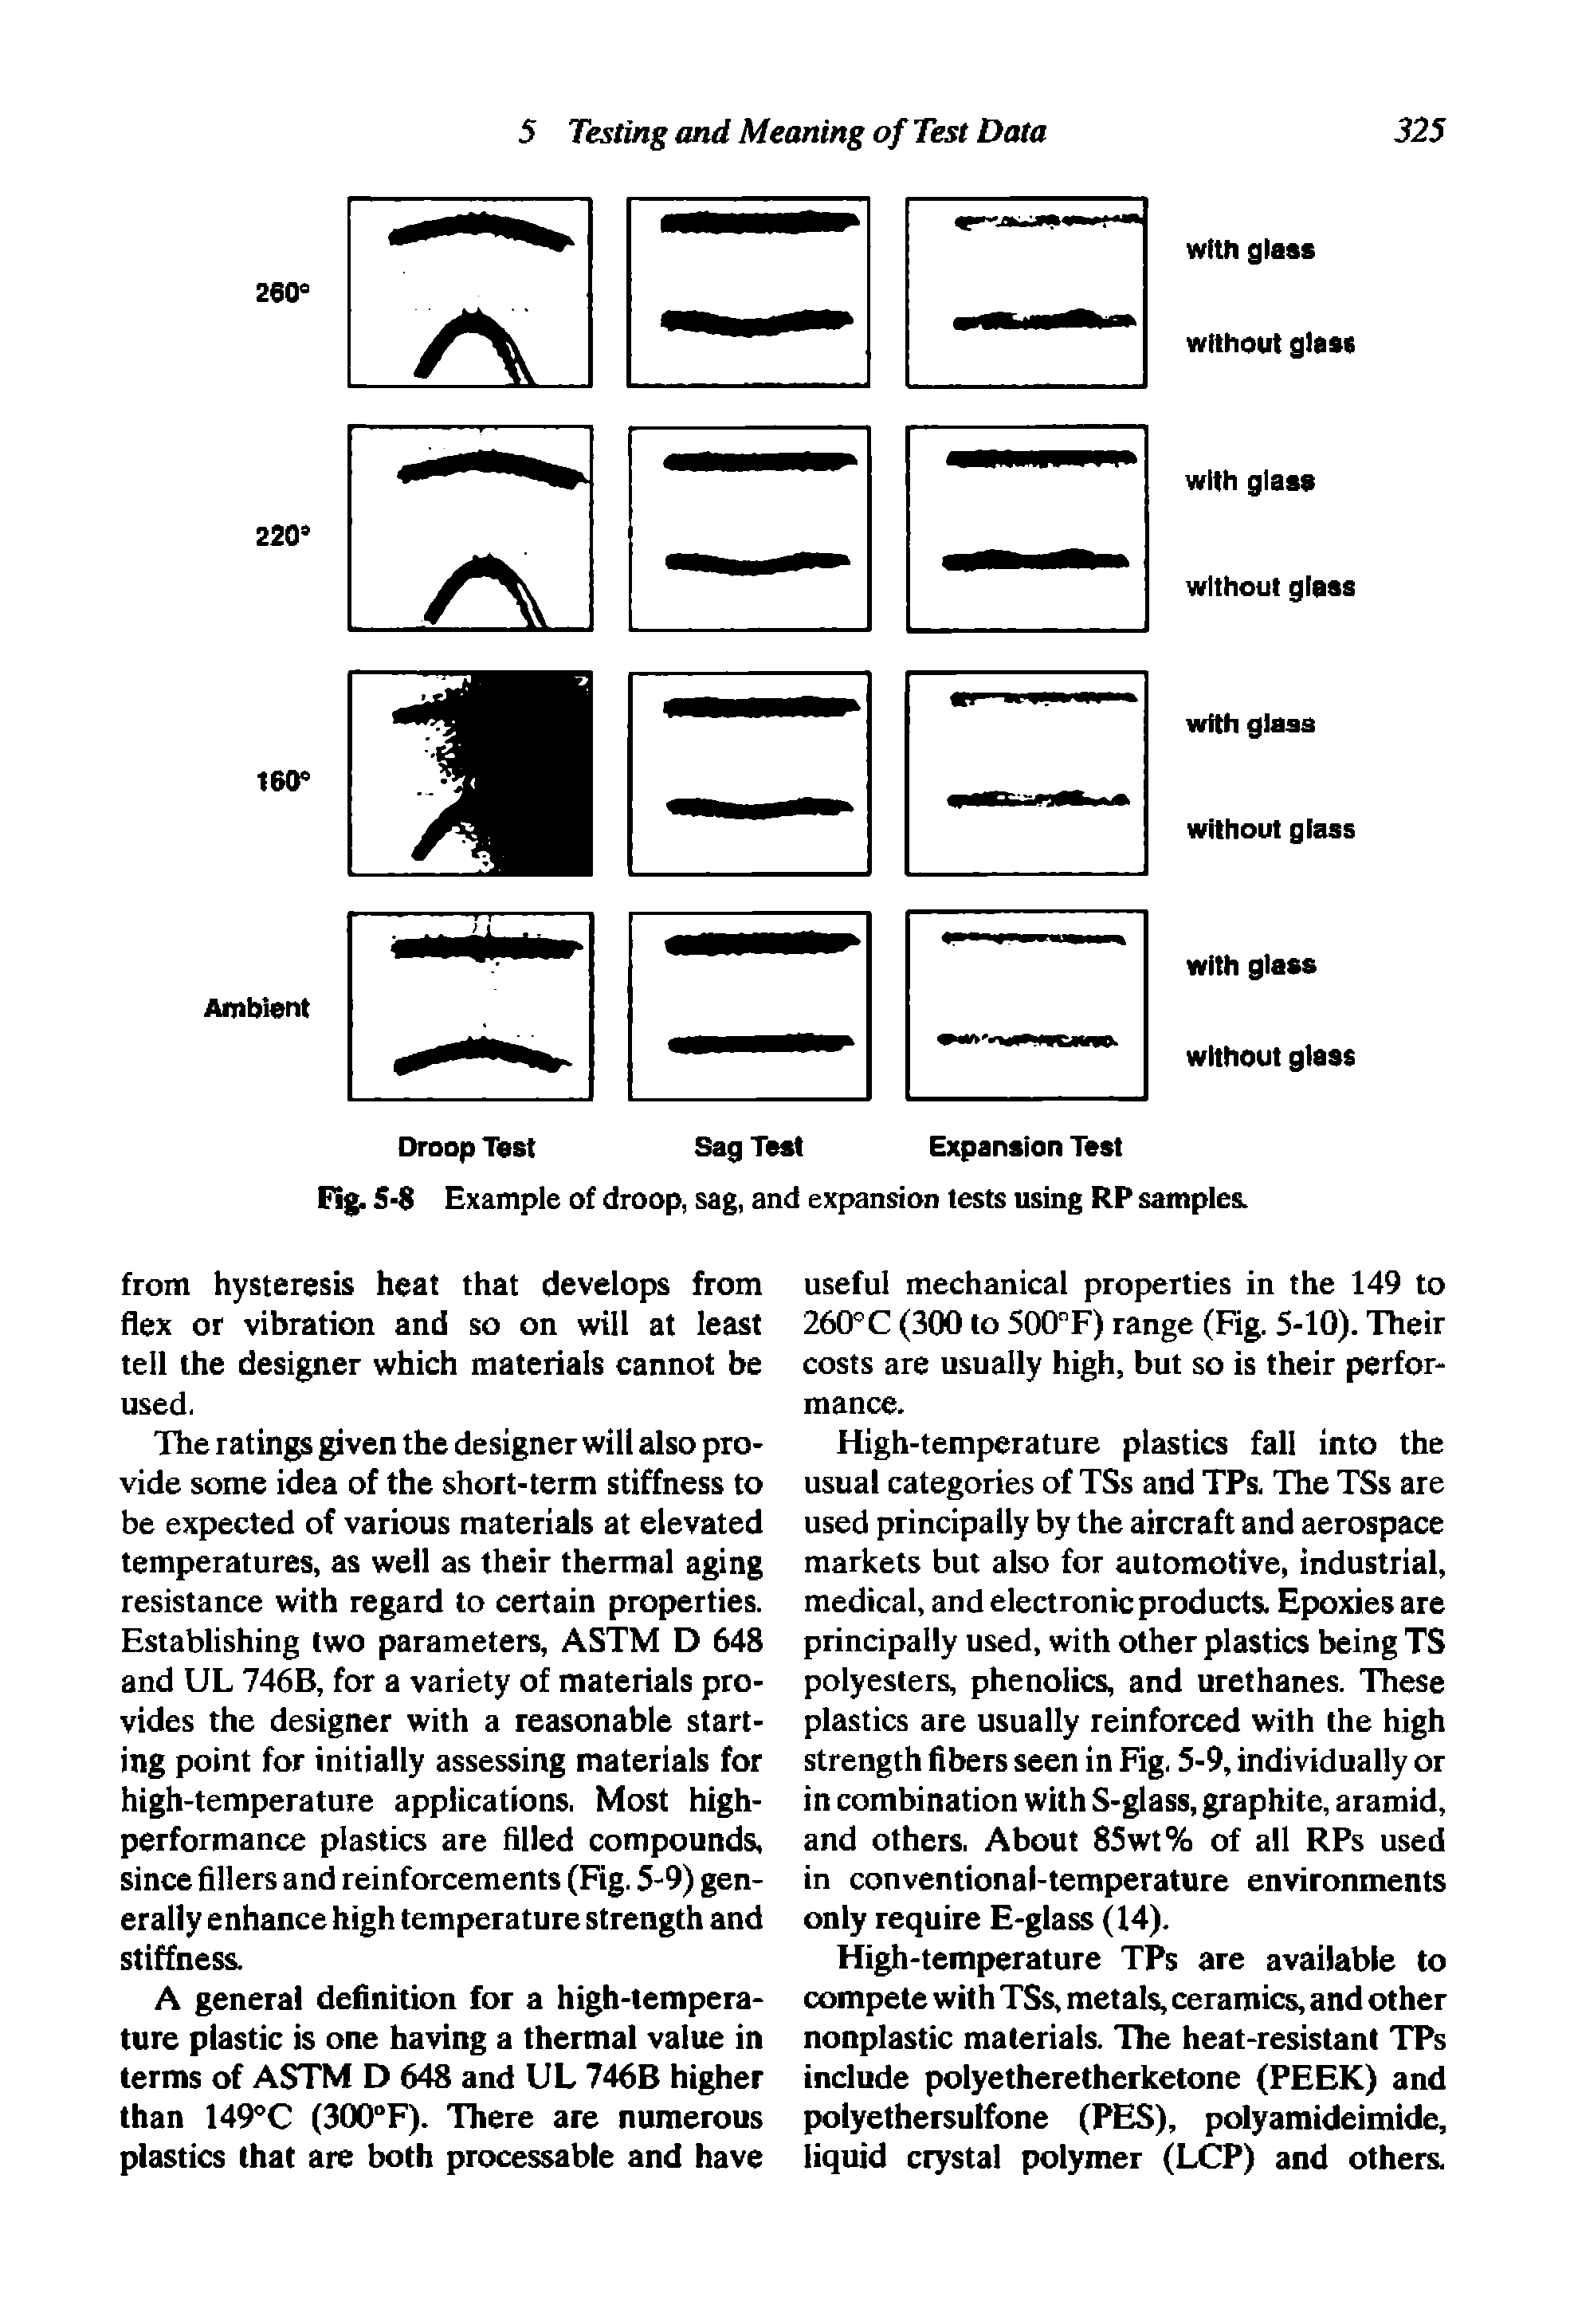 Fig. 5-8 Example of droop, sag, and expansion tests using RP samples.